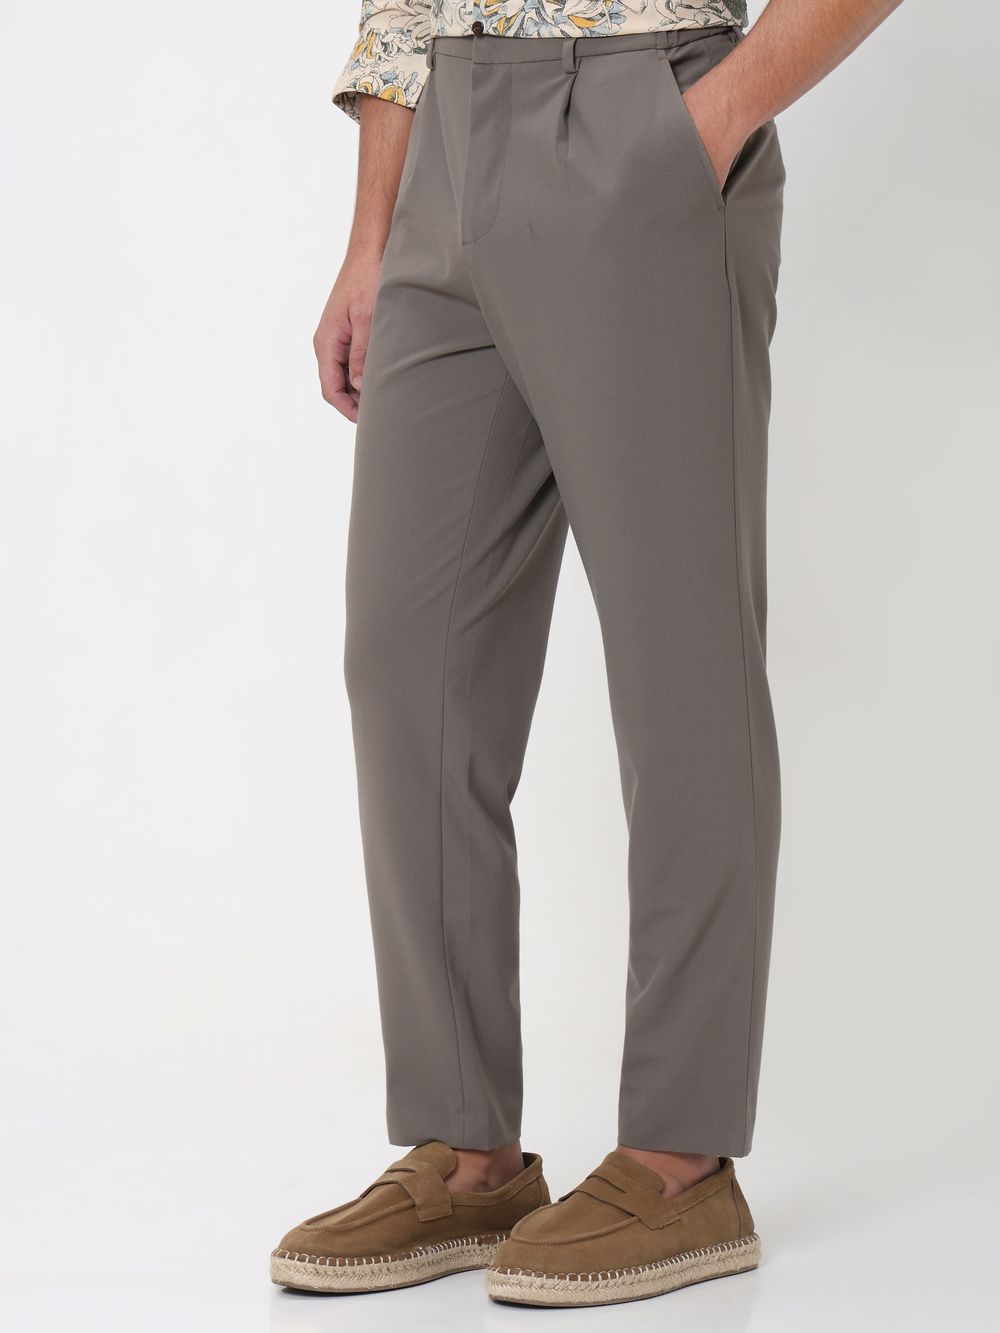 Beige Relaxed Tapered Fit Single Pleated Pants Trouser